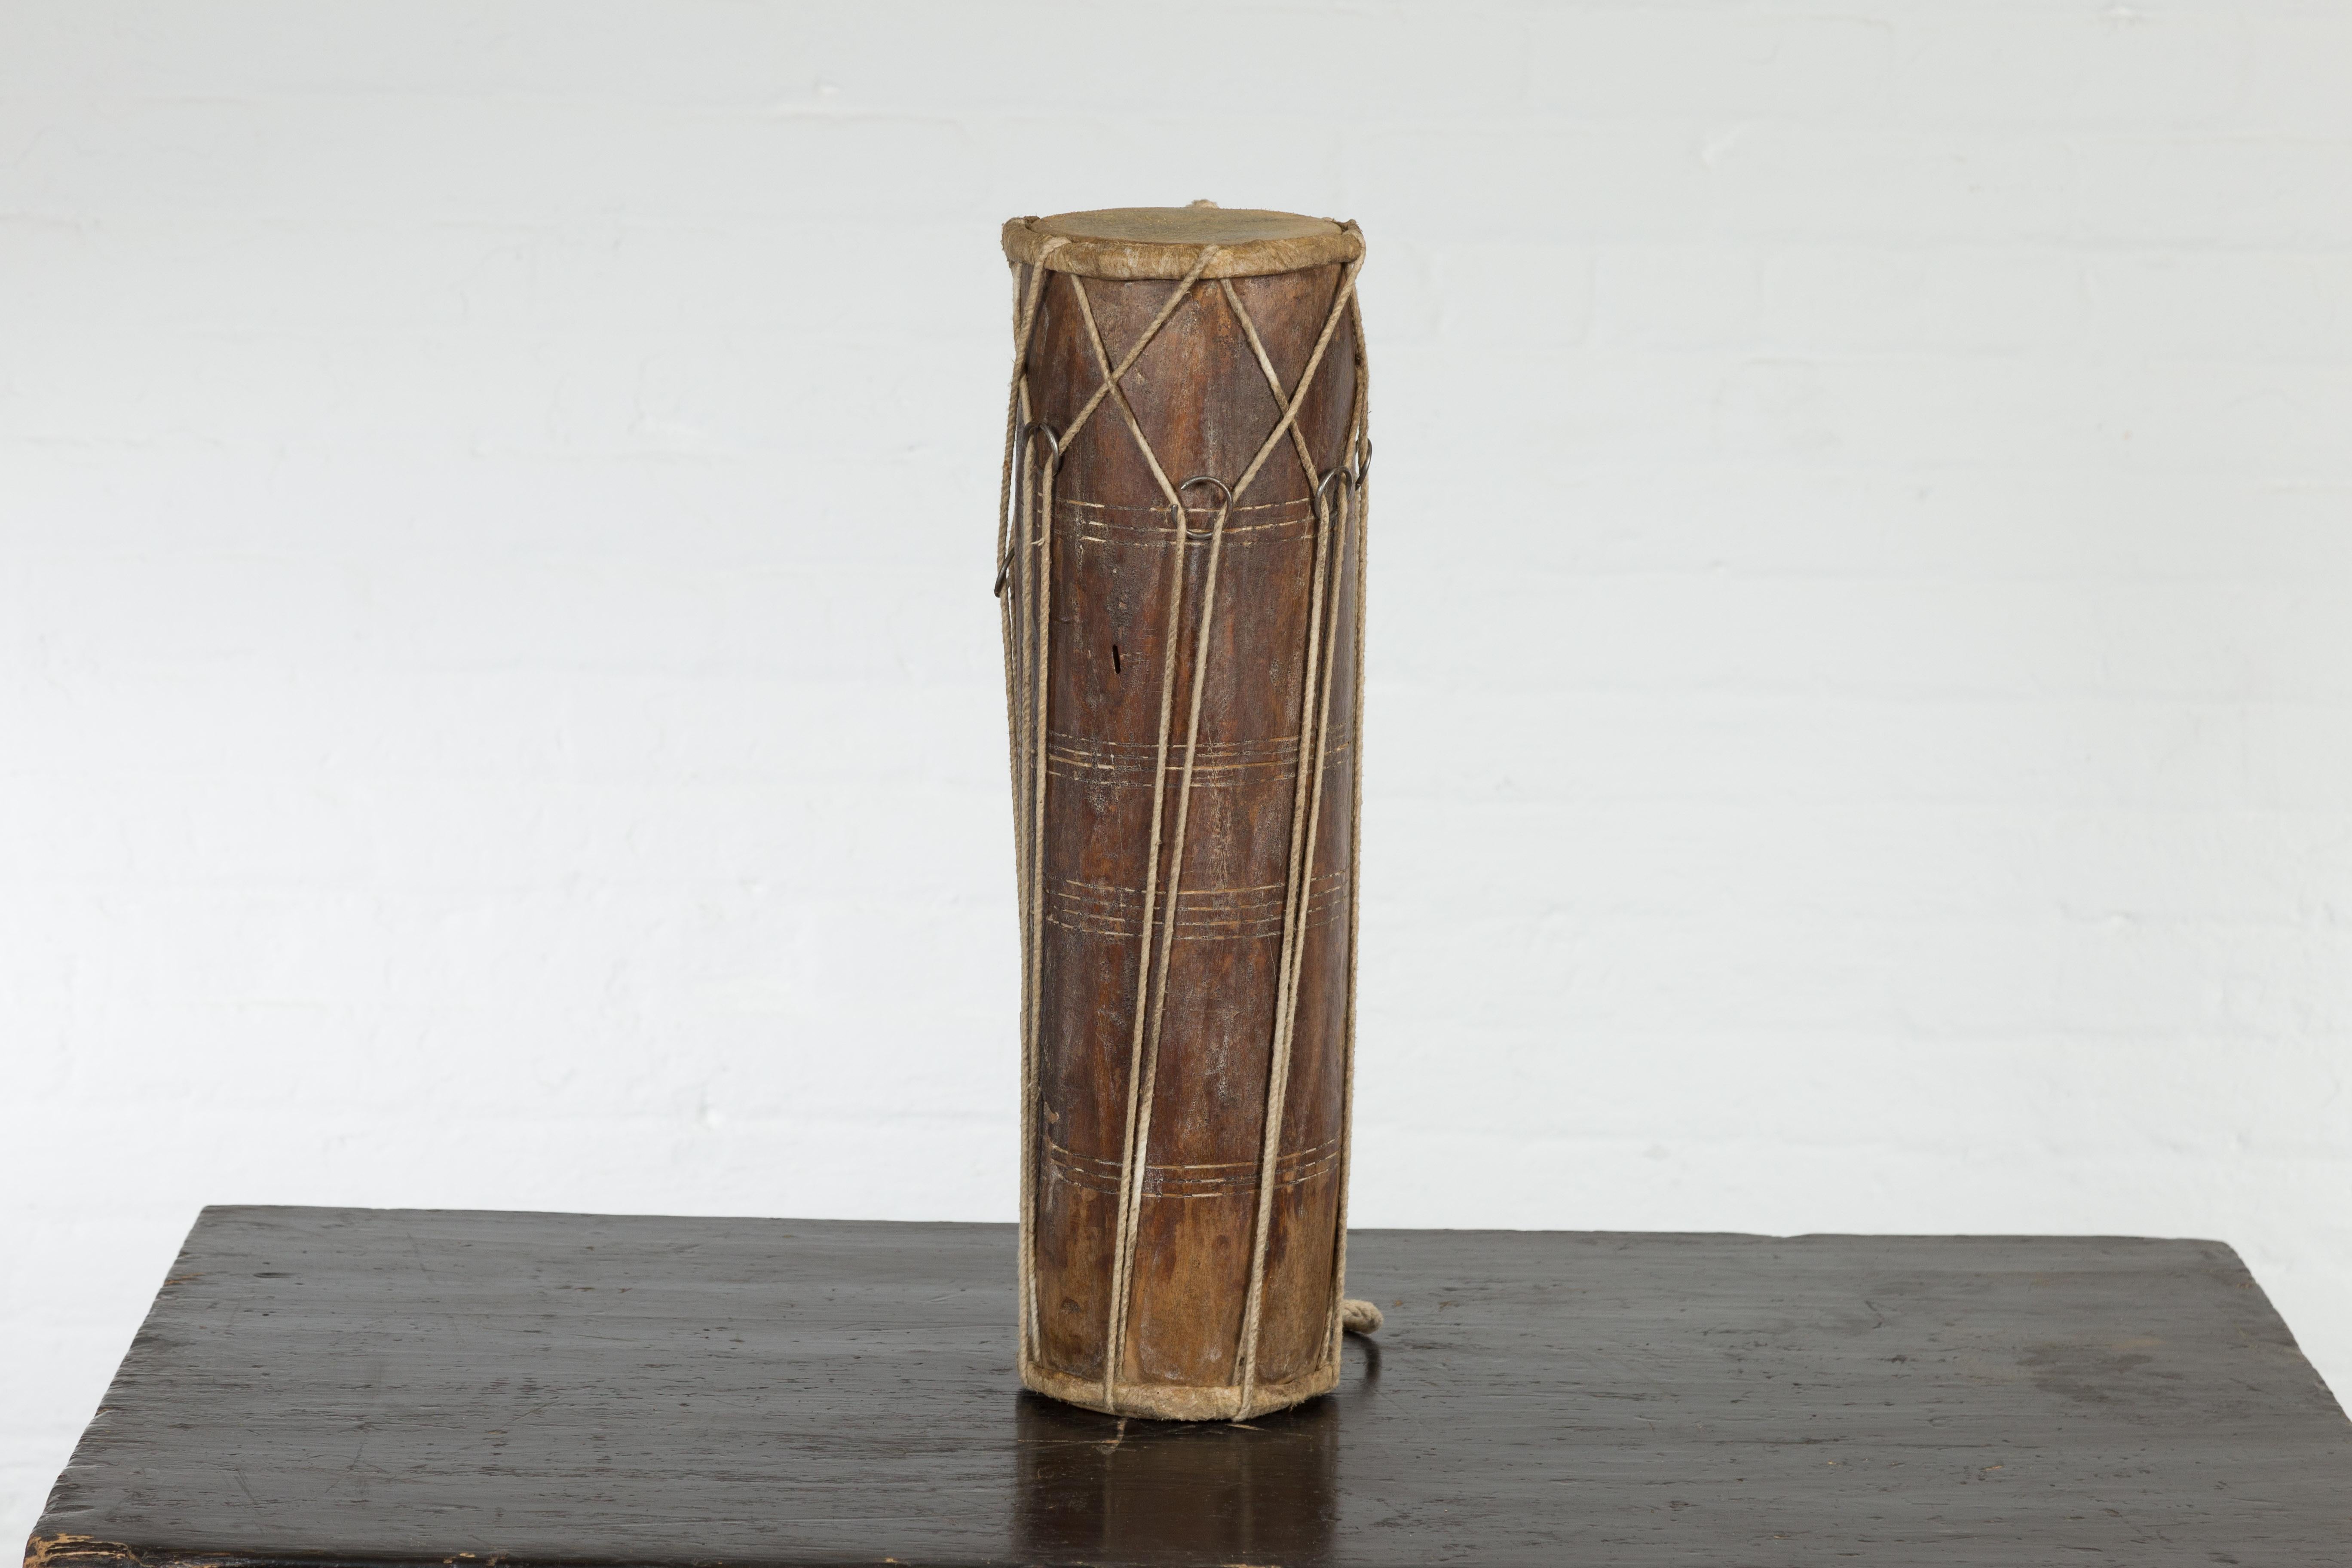 A vintage Thai wood, leather and rope Klong Khaek processional drum from the mid 20th century, with ties and weathered patina. Created in Thailand during the midcentury period, this Klong Khaek drum was likely used in Thai ensembles for processions.